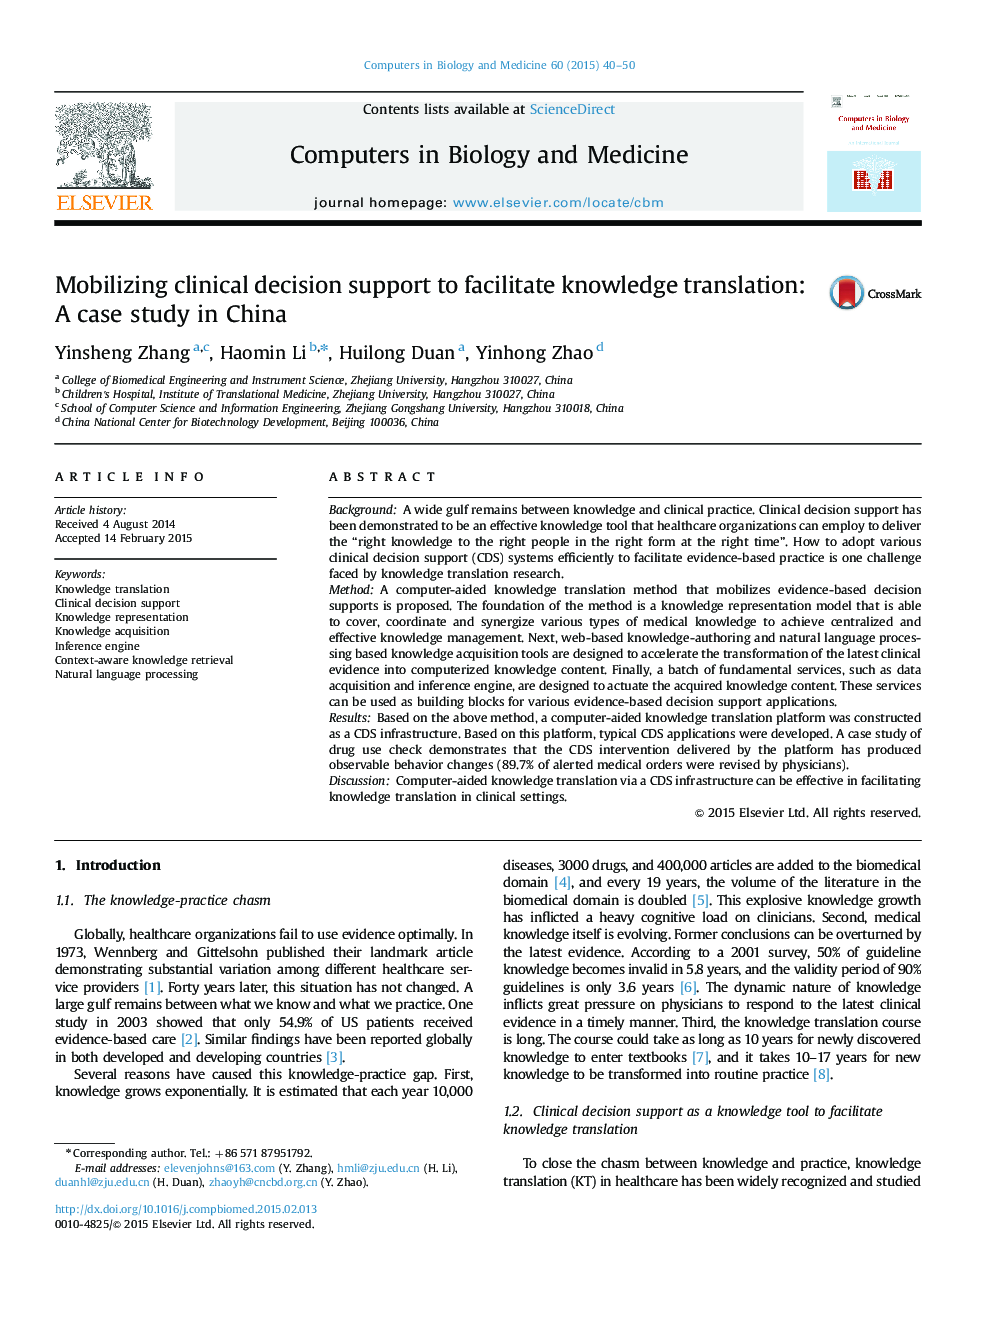 Mobilizing clinical decision support to facilitate knowledge translation: A case study in China